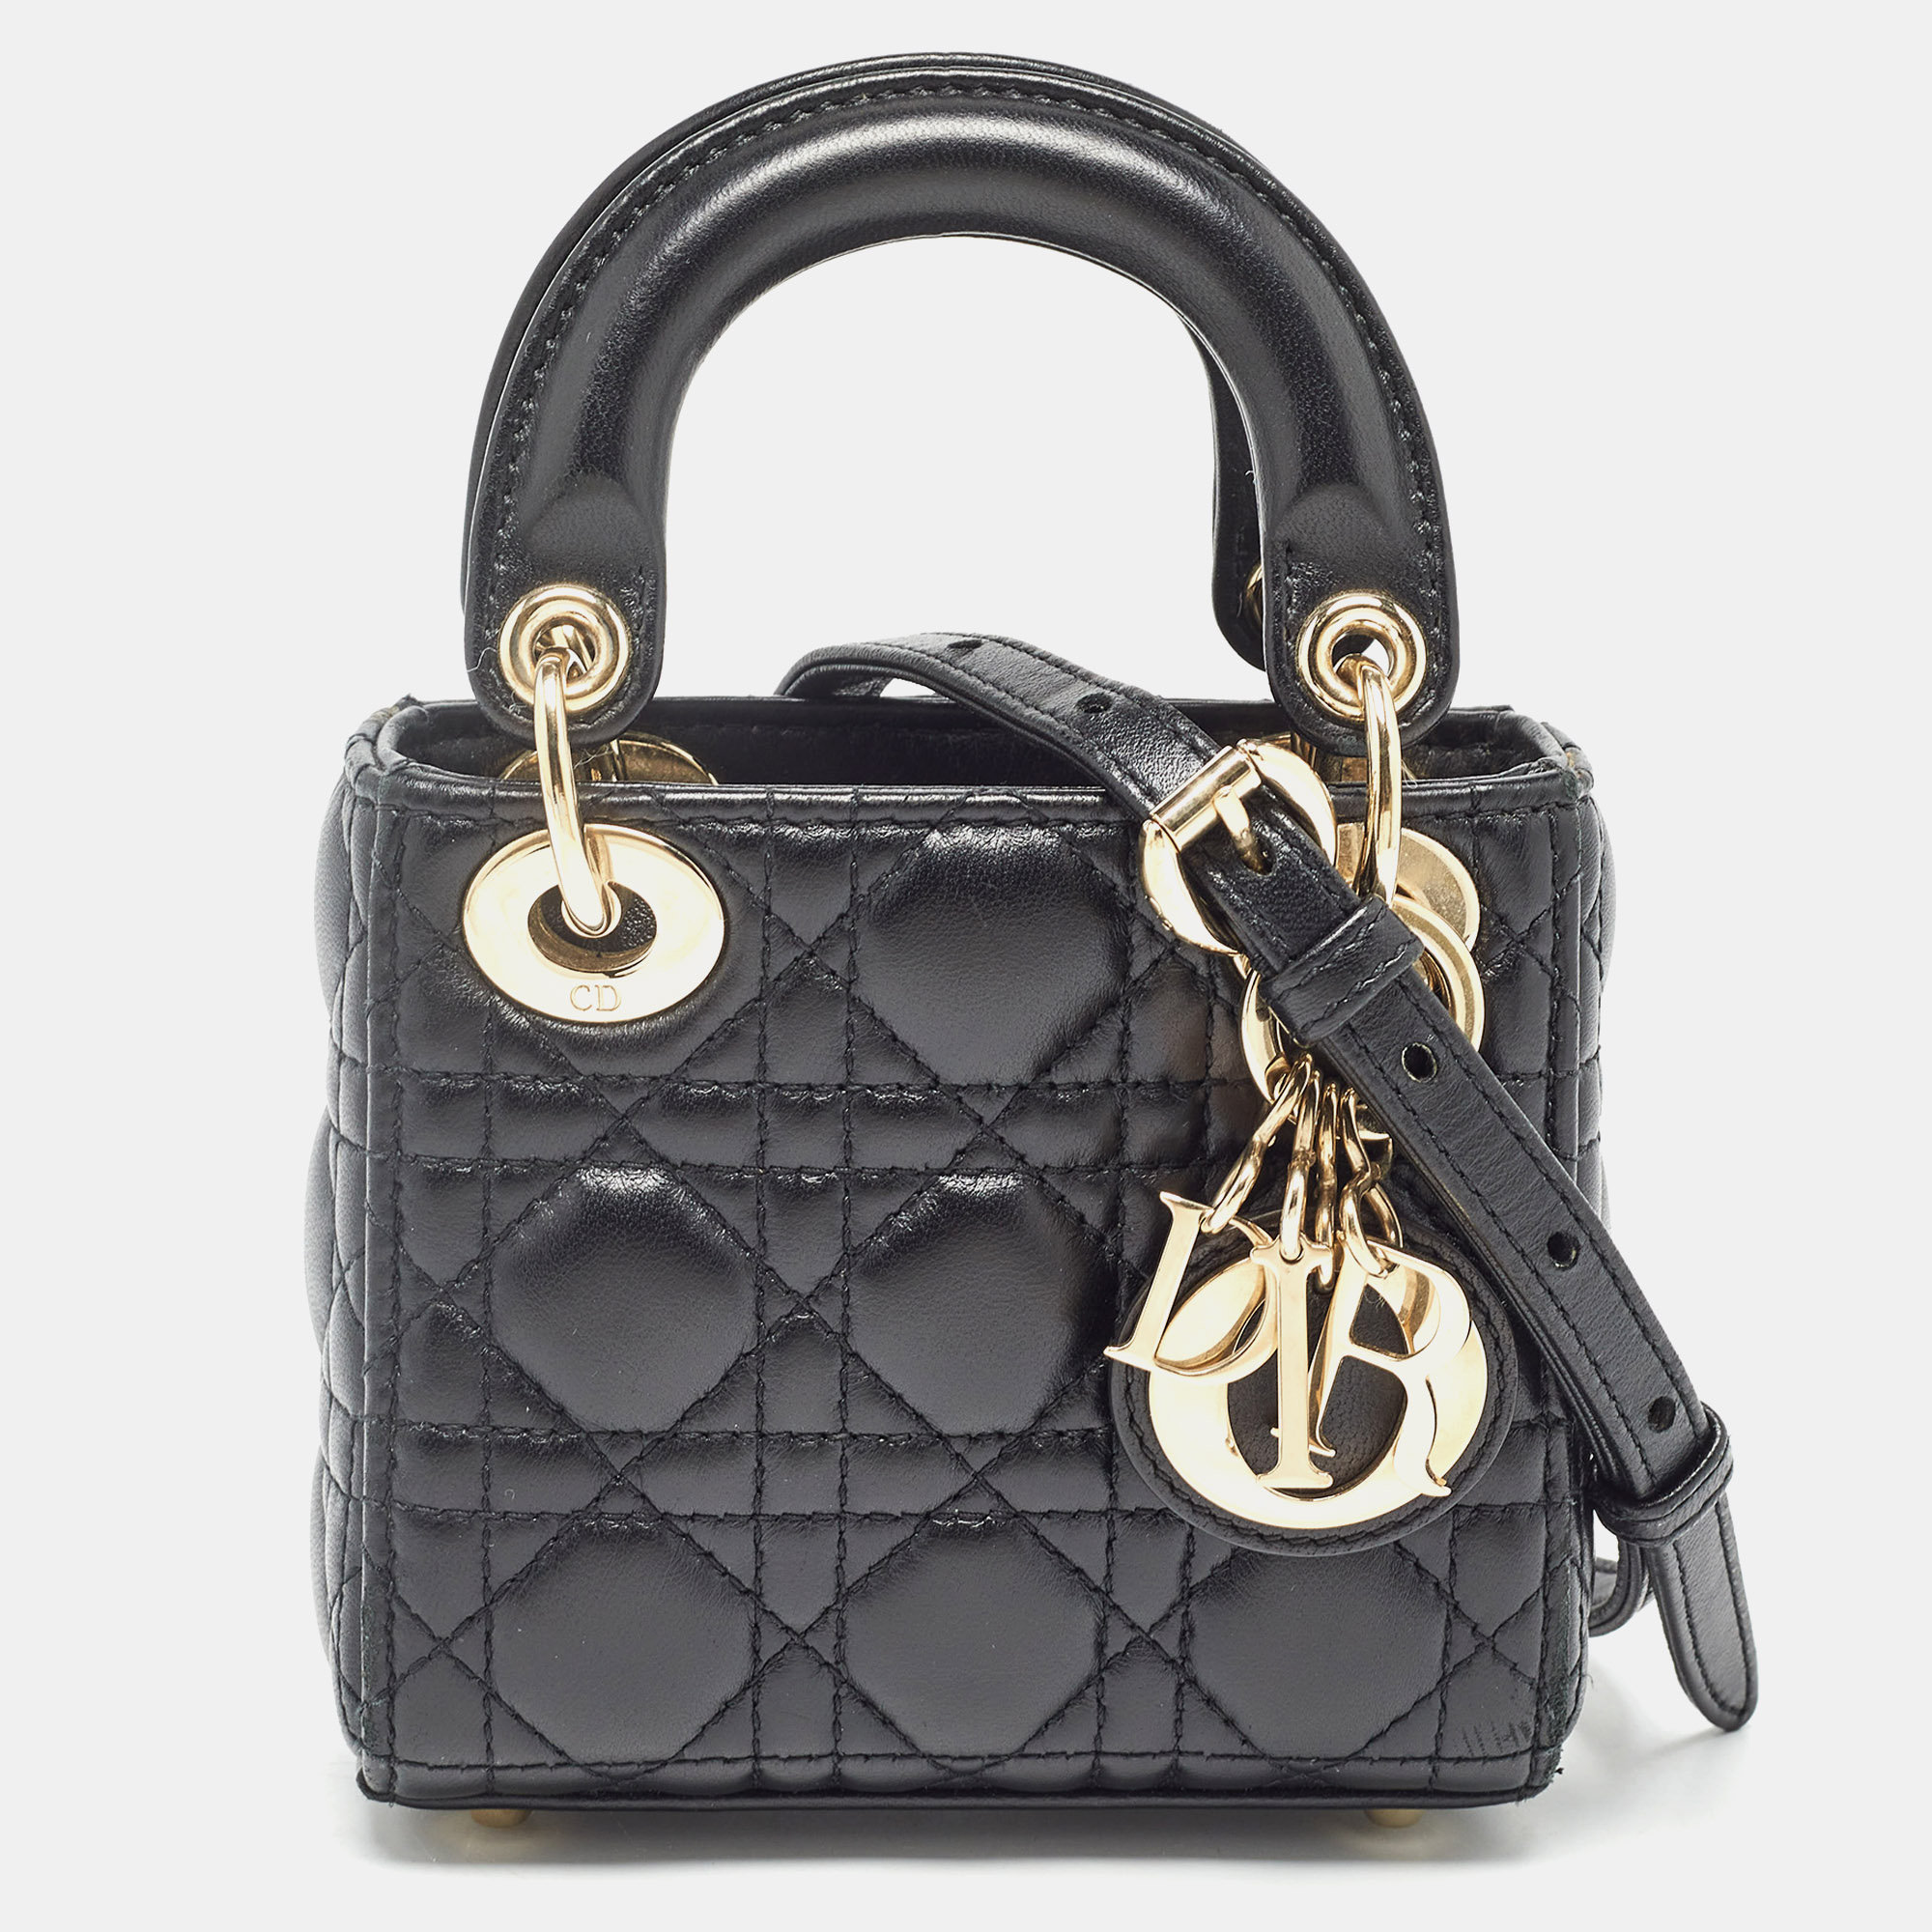 Dior black cannage leather micro lady dior tote